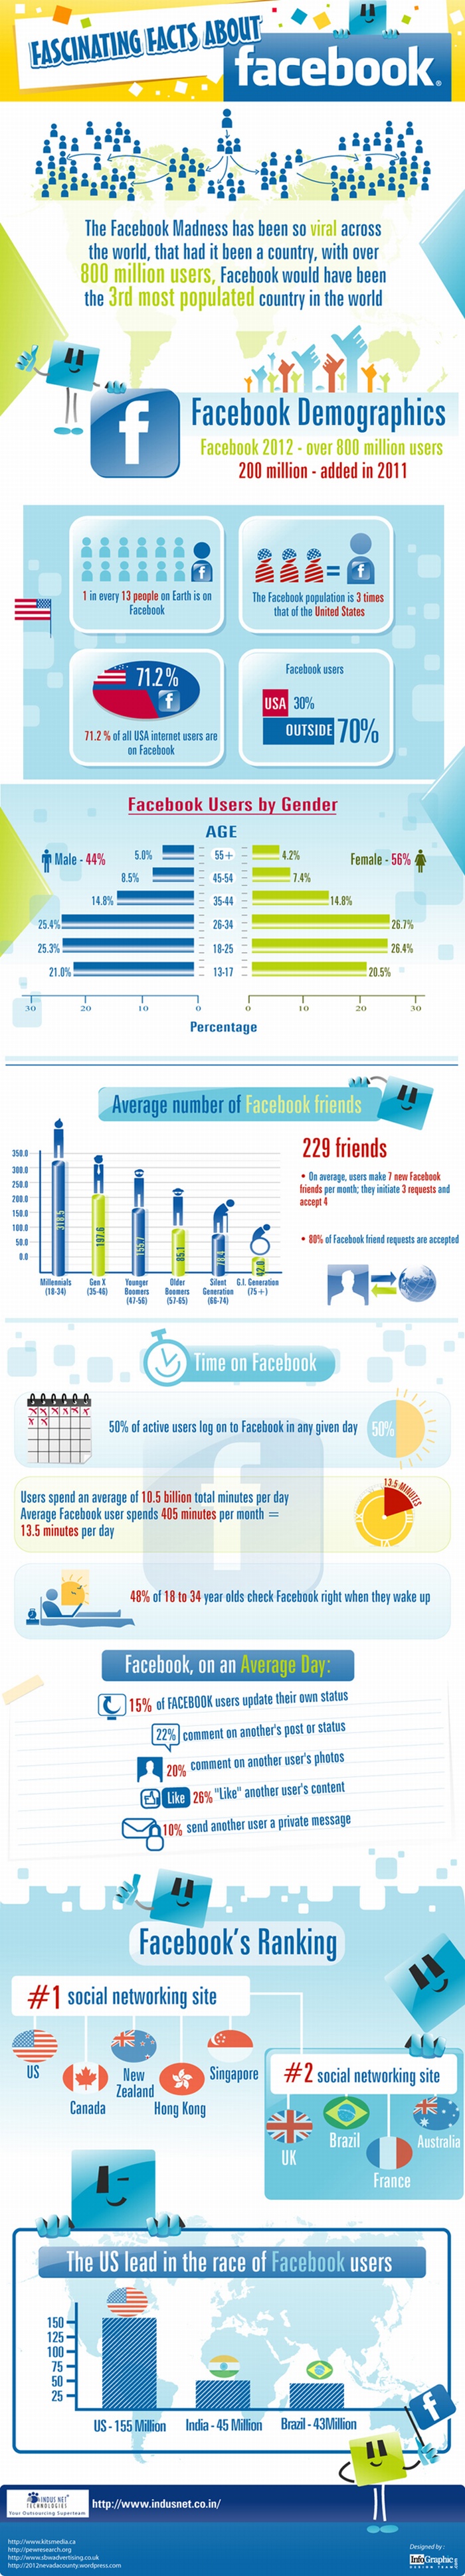 Fascinating Facts About Facebook | Visual.ly